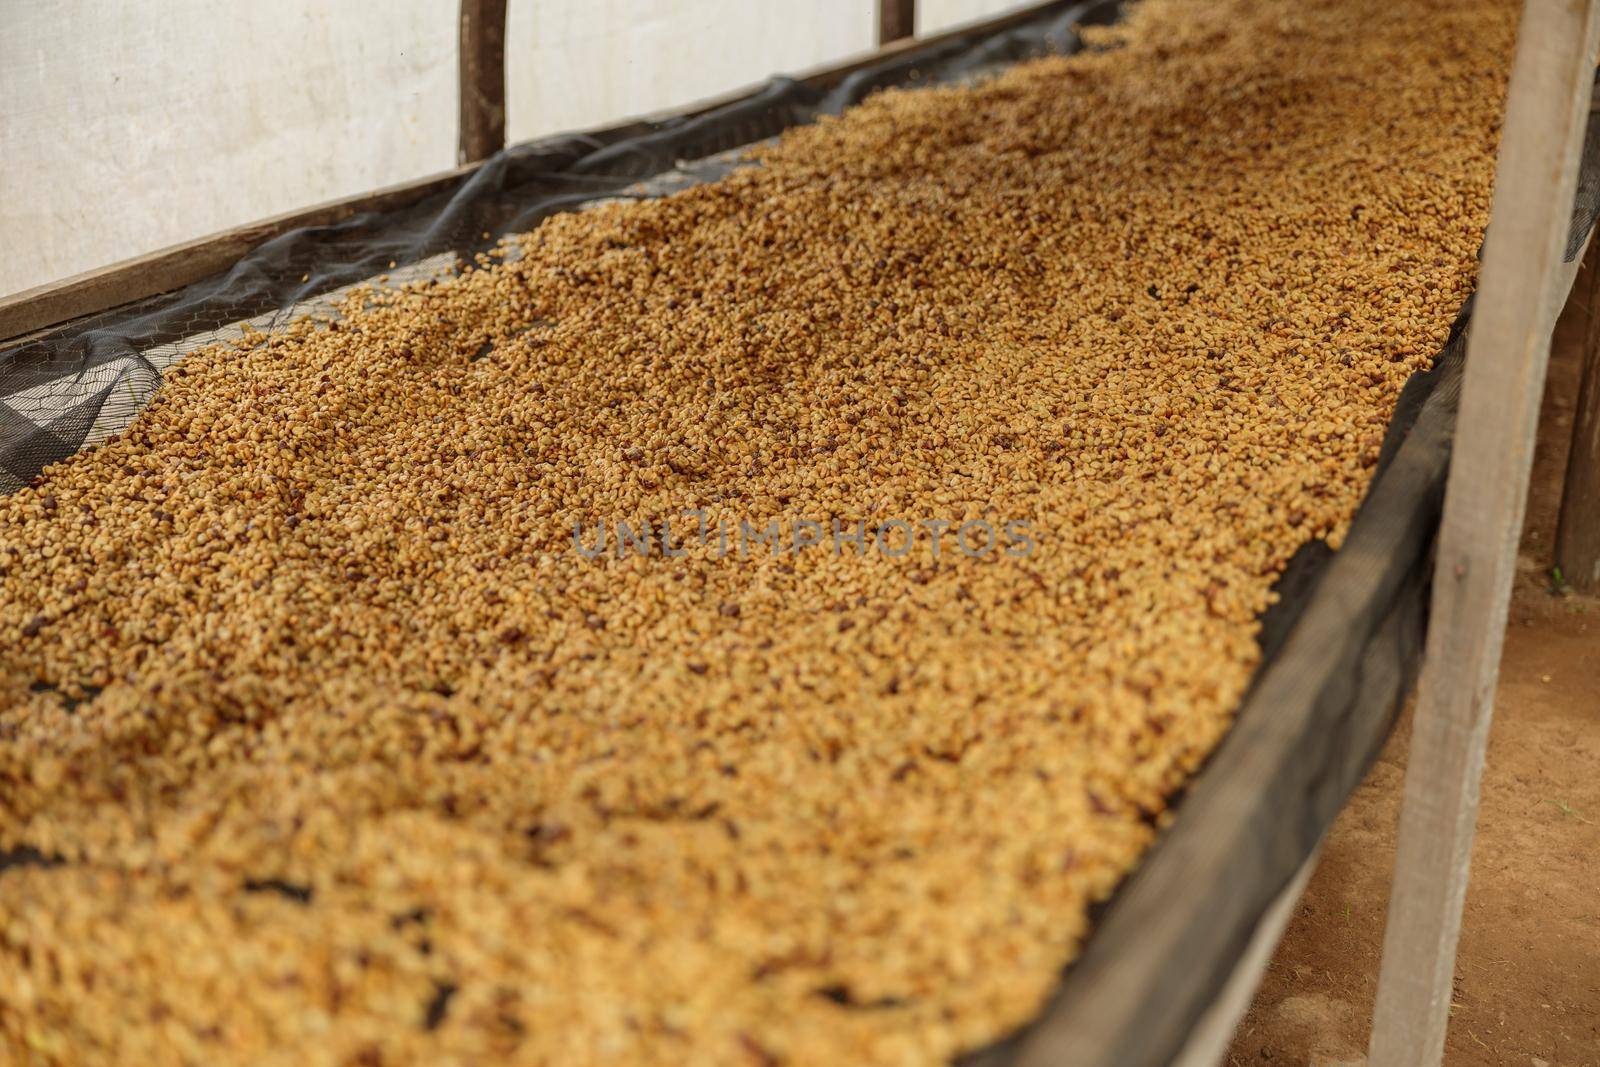 Close up of coffee beans during honey process. Coffee production